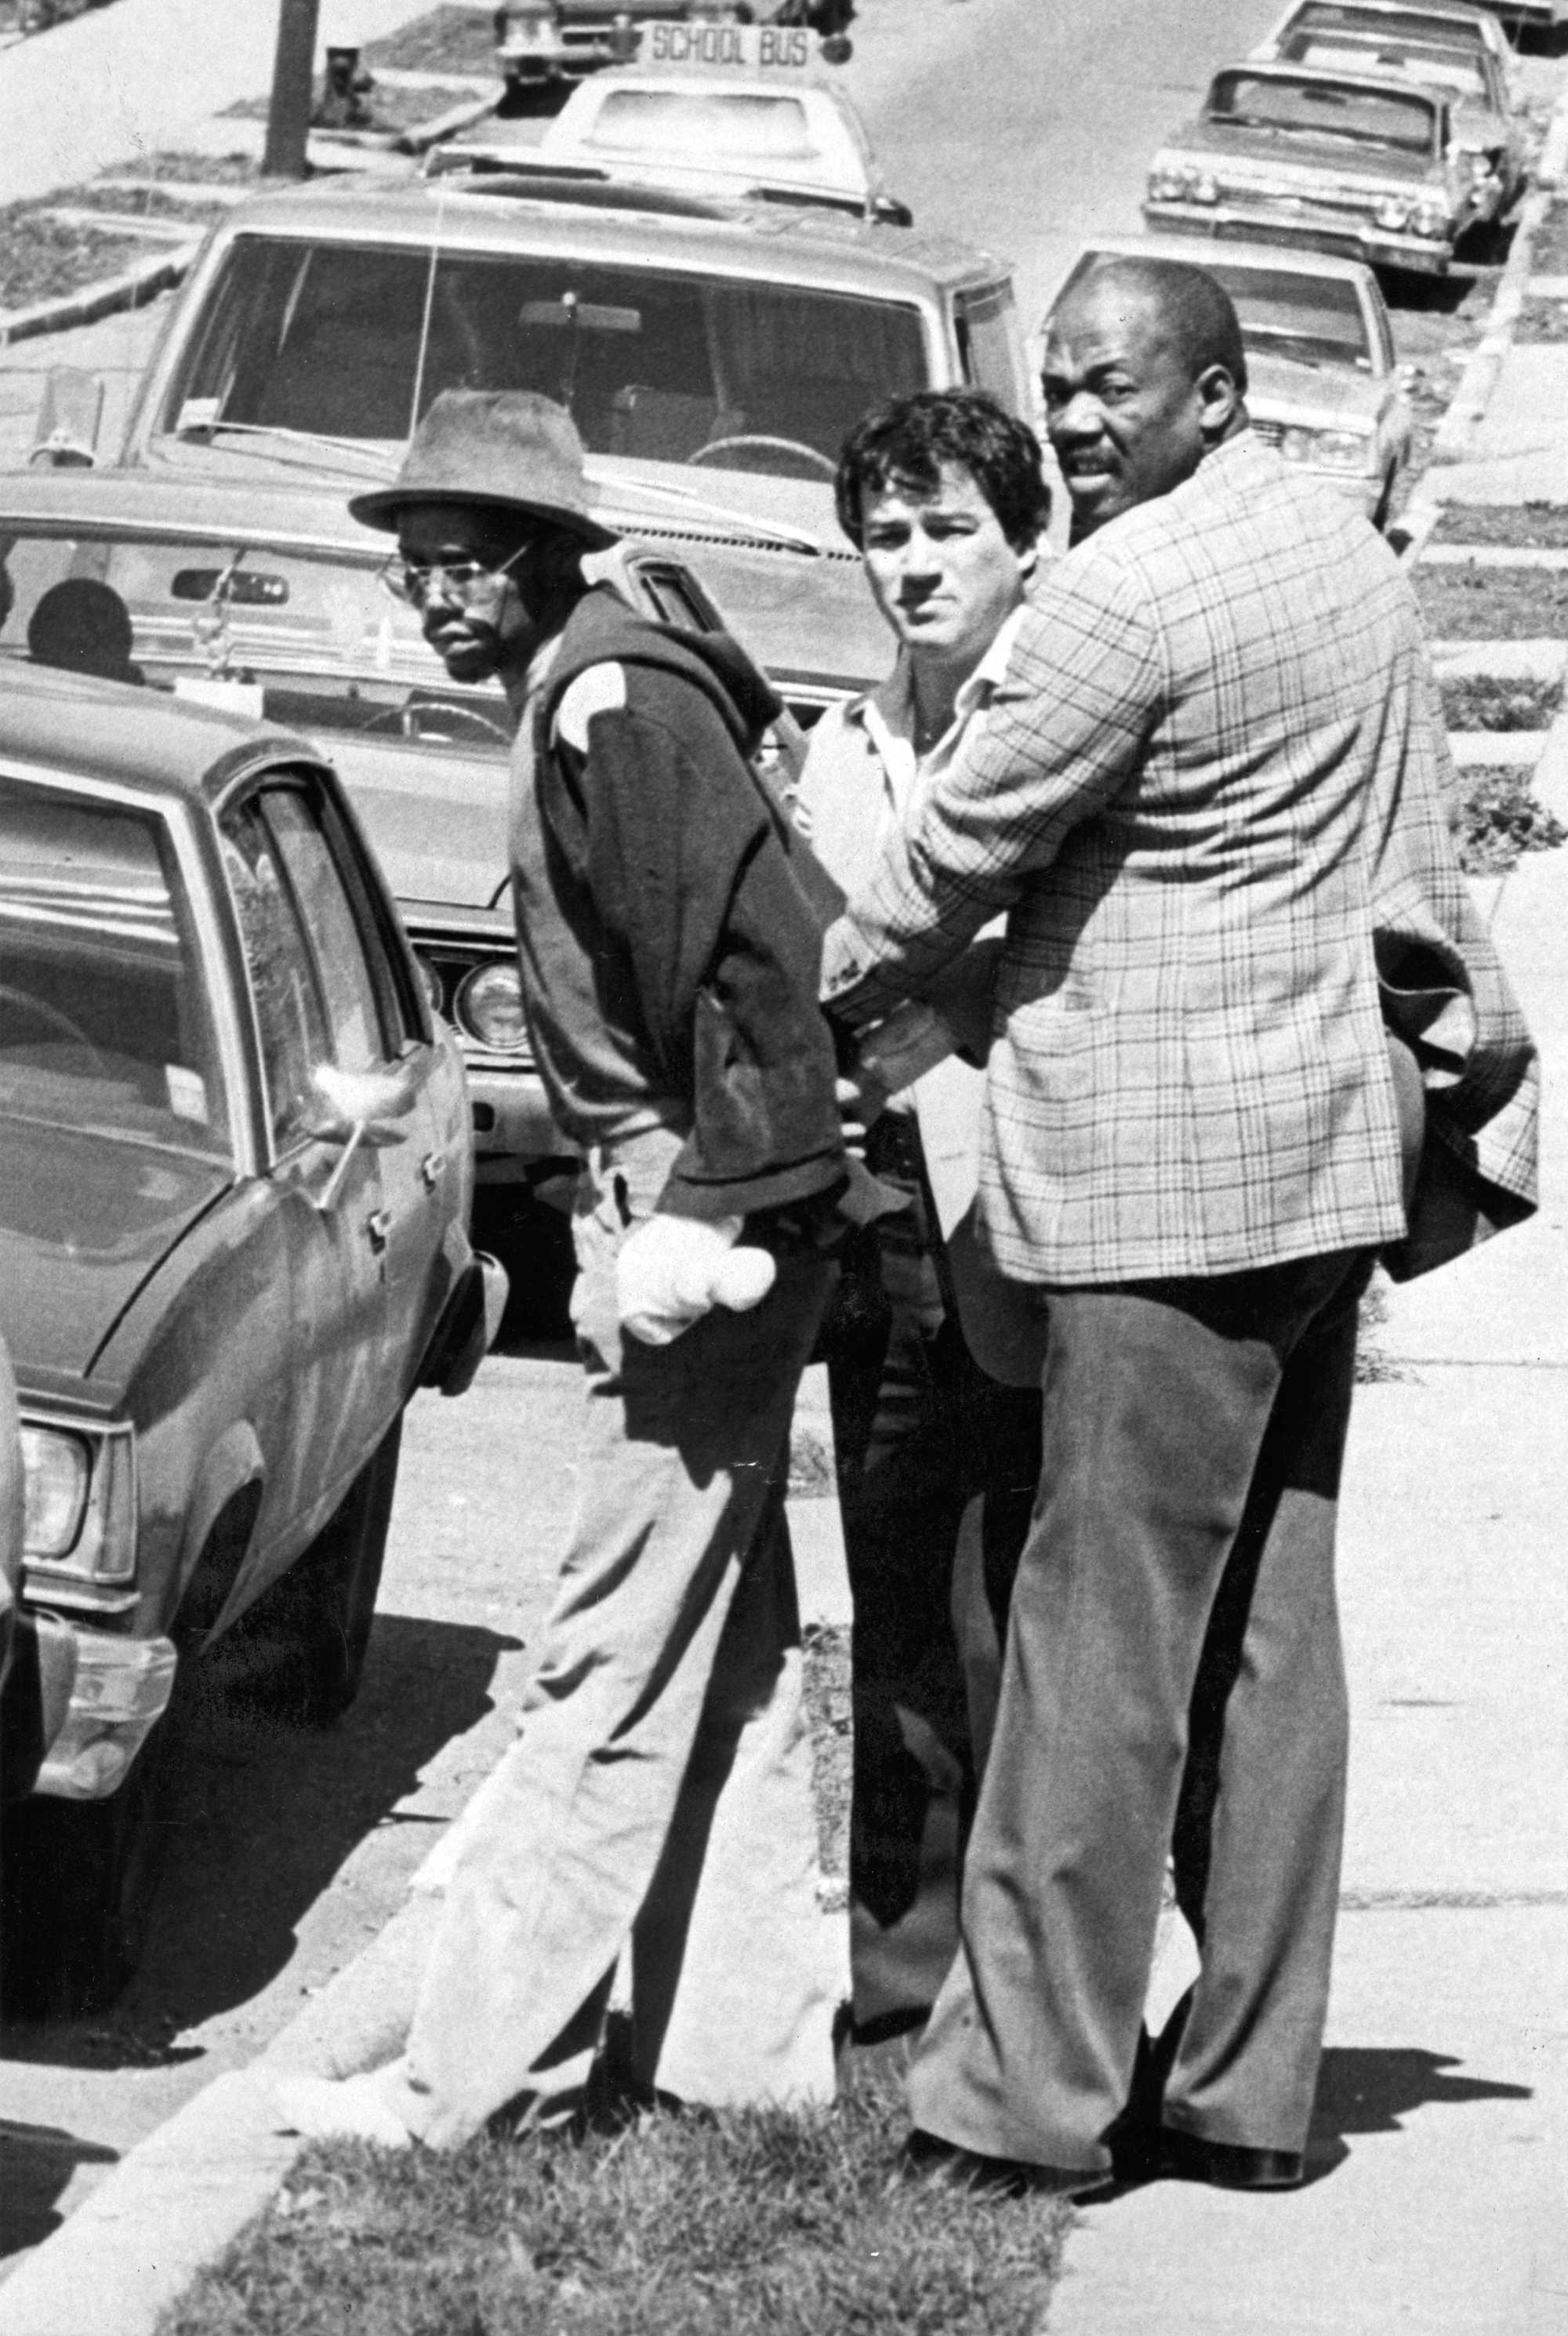 Willie Bennett was arrested outside his apartment on Lawrence Avenue in the Roxbury neighborhood of Boston on May 7, 1981. Bennett was shot in the hand while being taken into custody. 